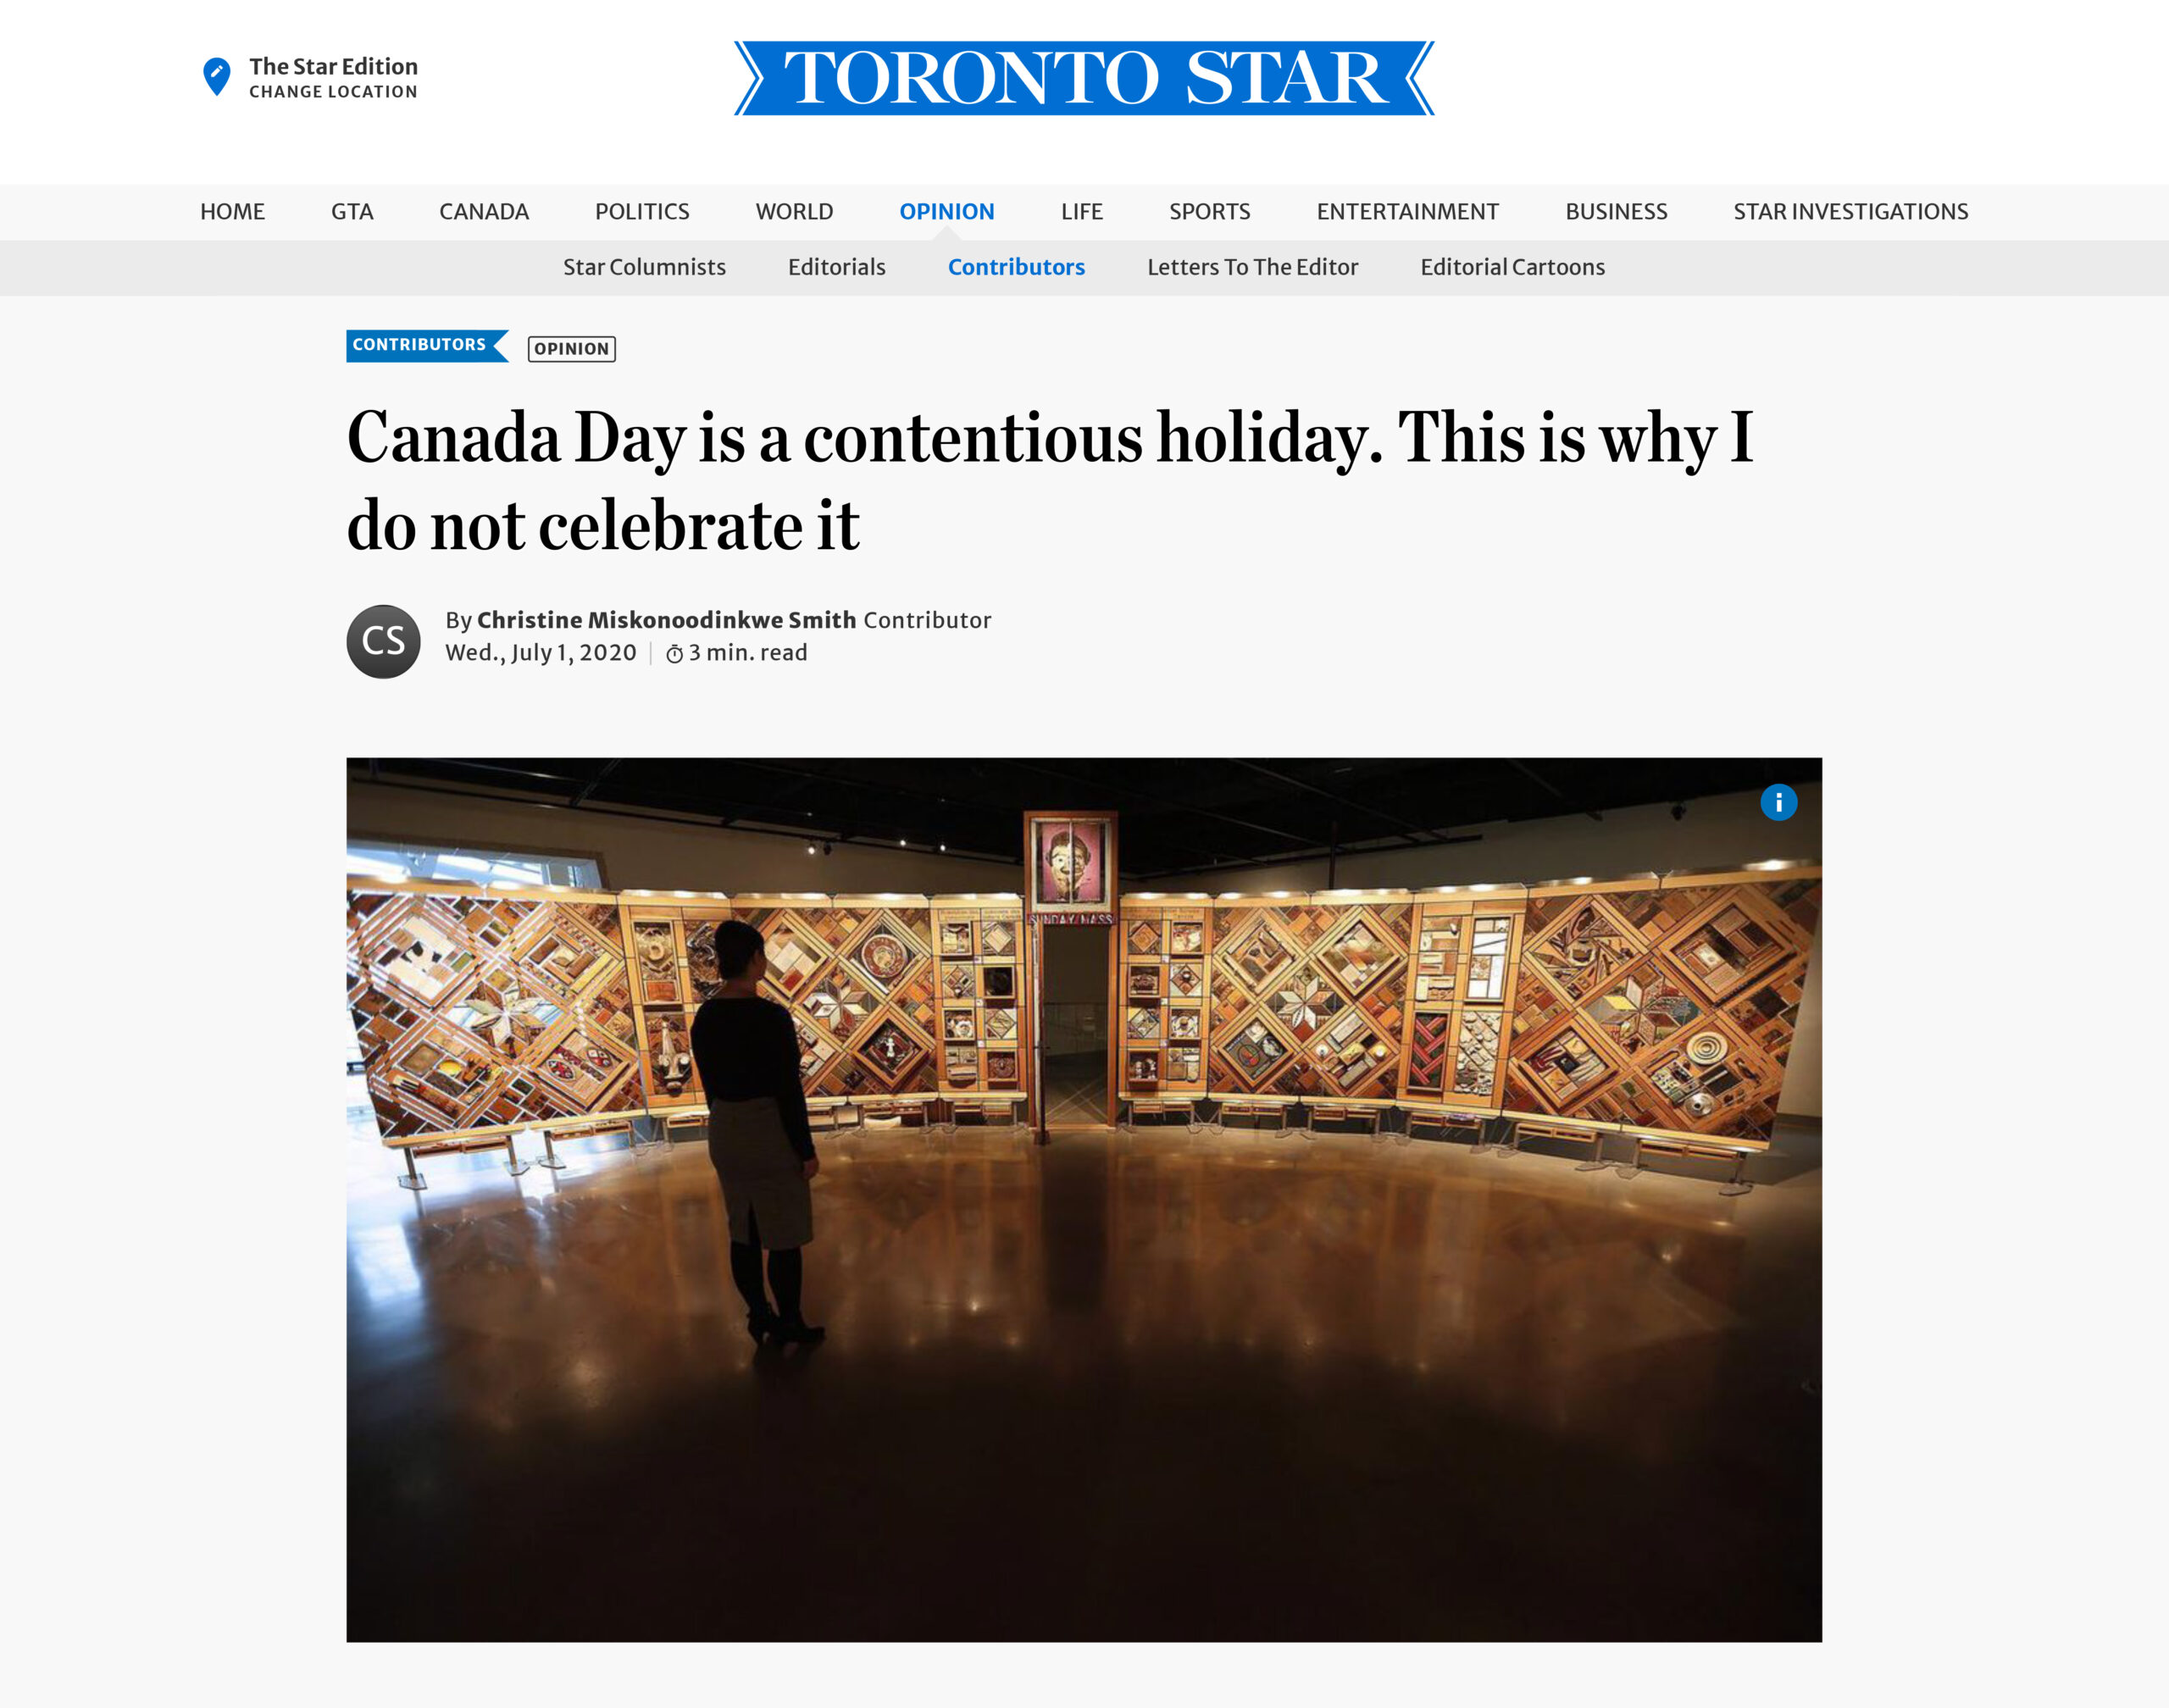 Canada Day is a contentious holiday. This is why I do not celebrate it | The Star